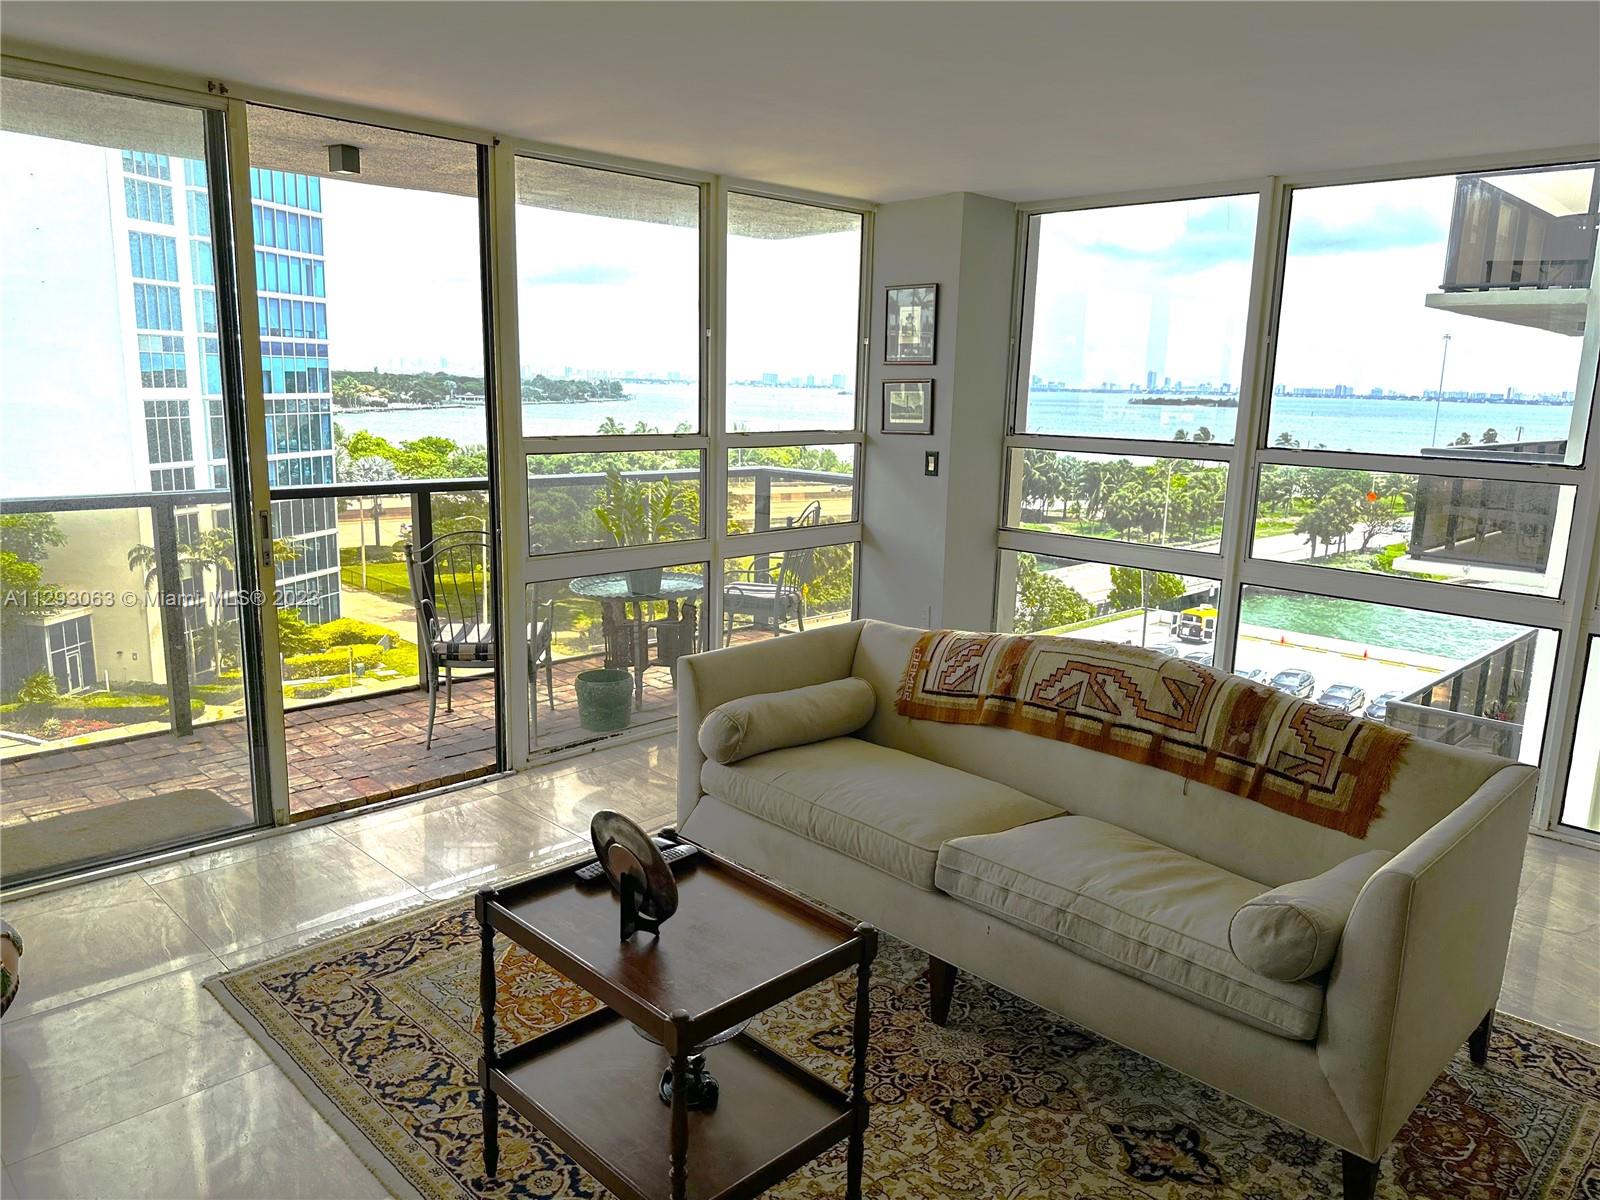 Condo faces NE with gorgeous views of Biscayne Bay and the Intracoastal.